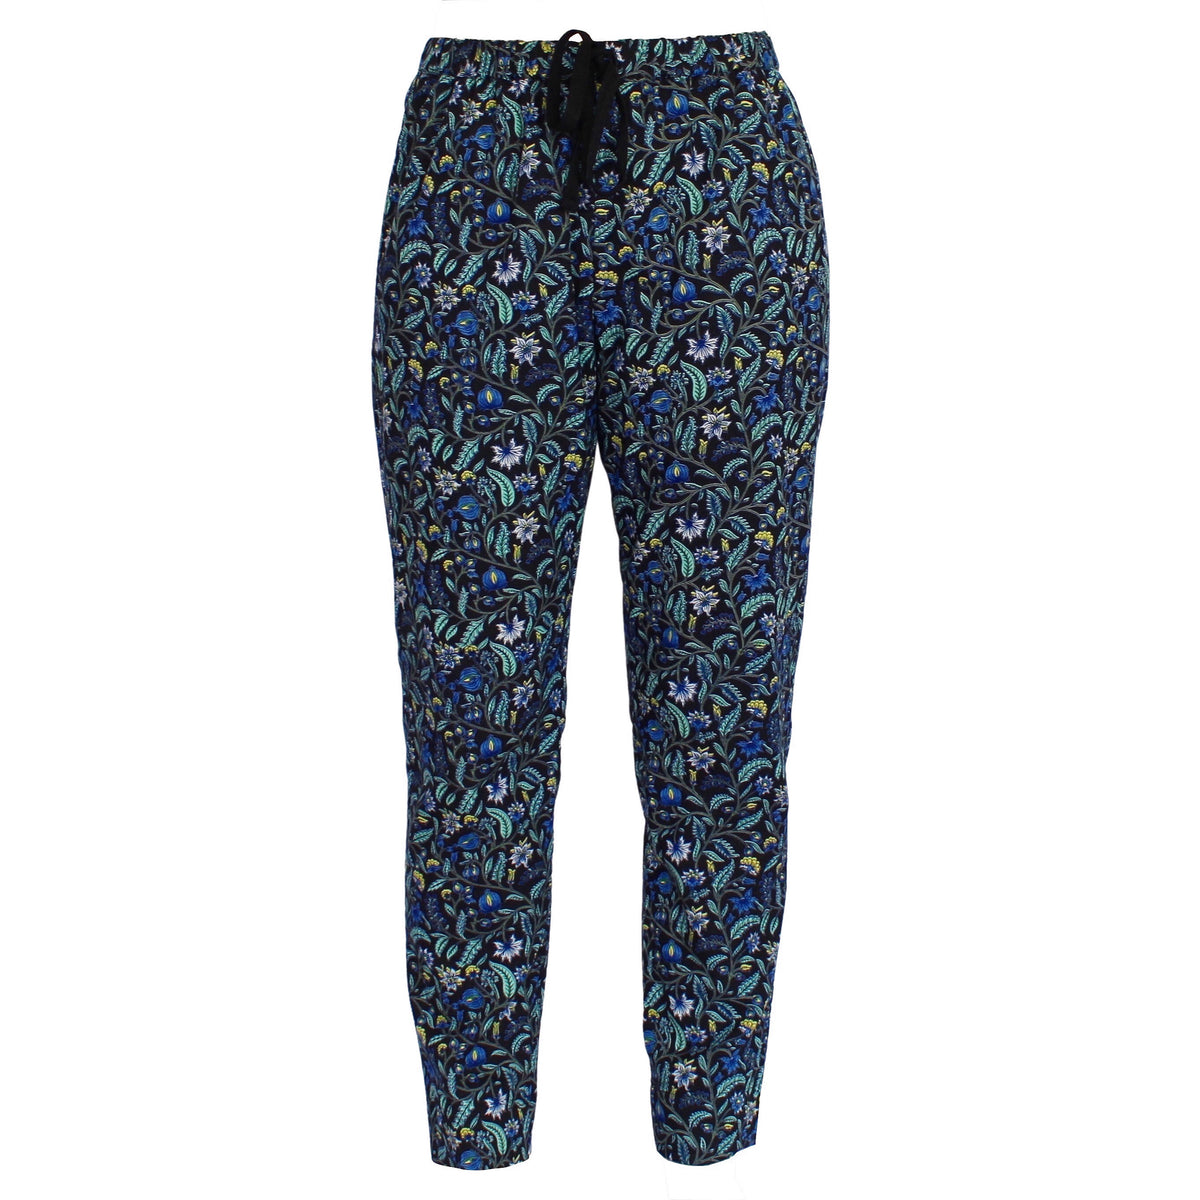 Aish Shama Pant in Navy Floral